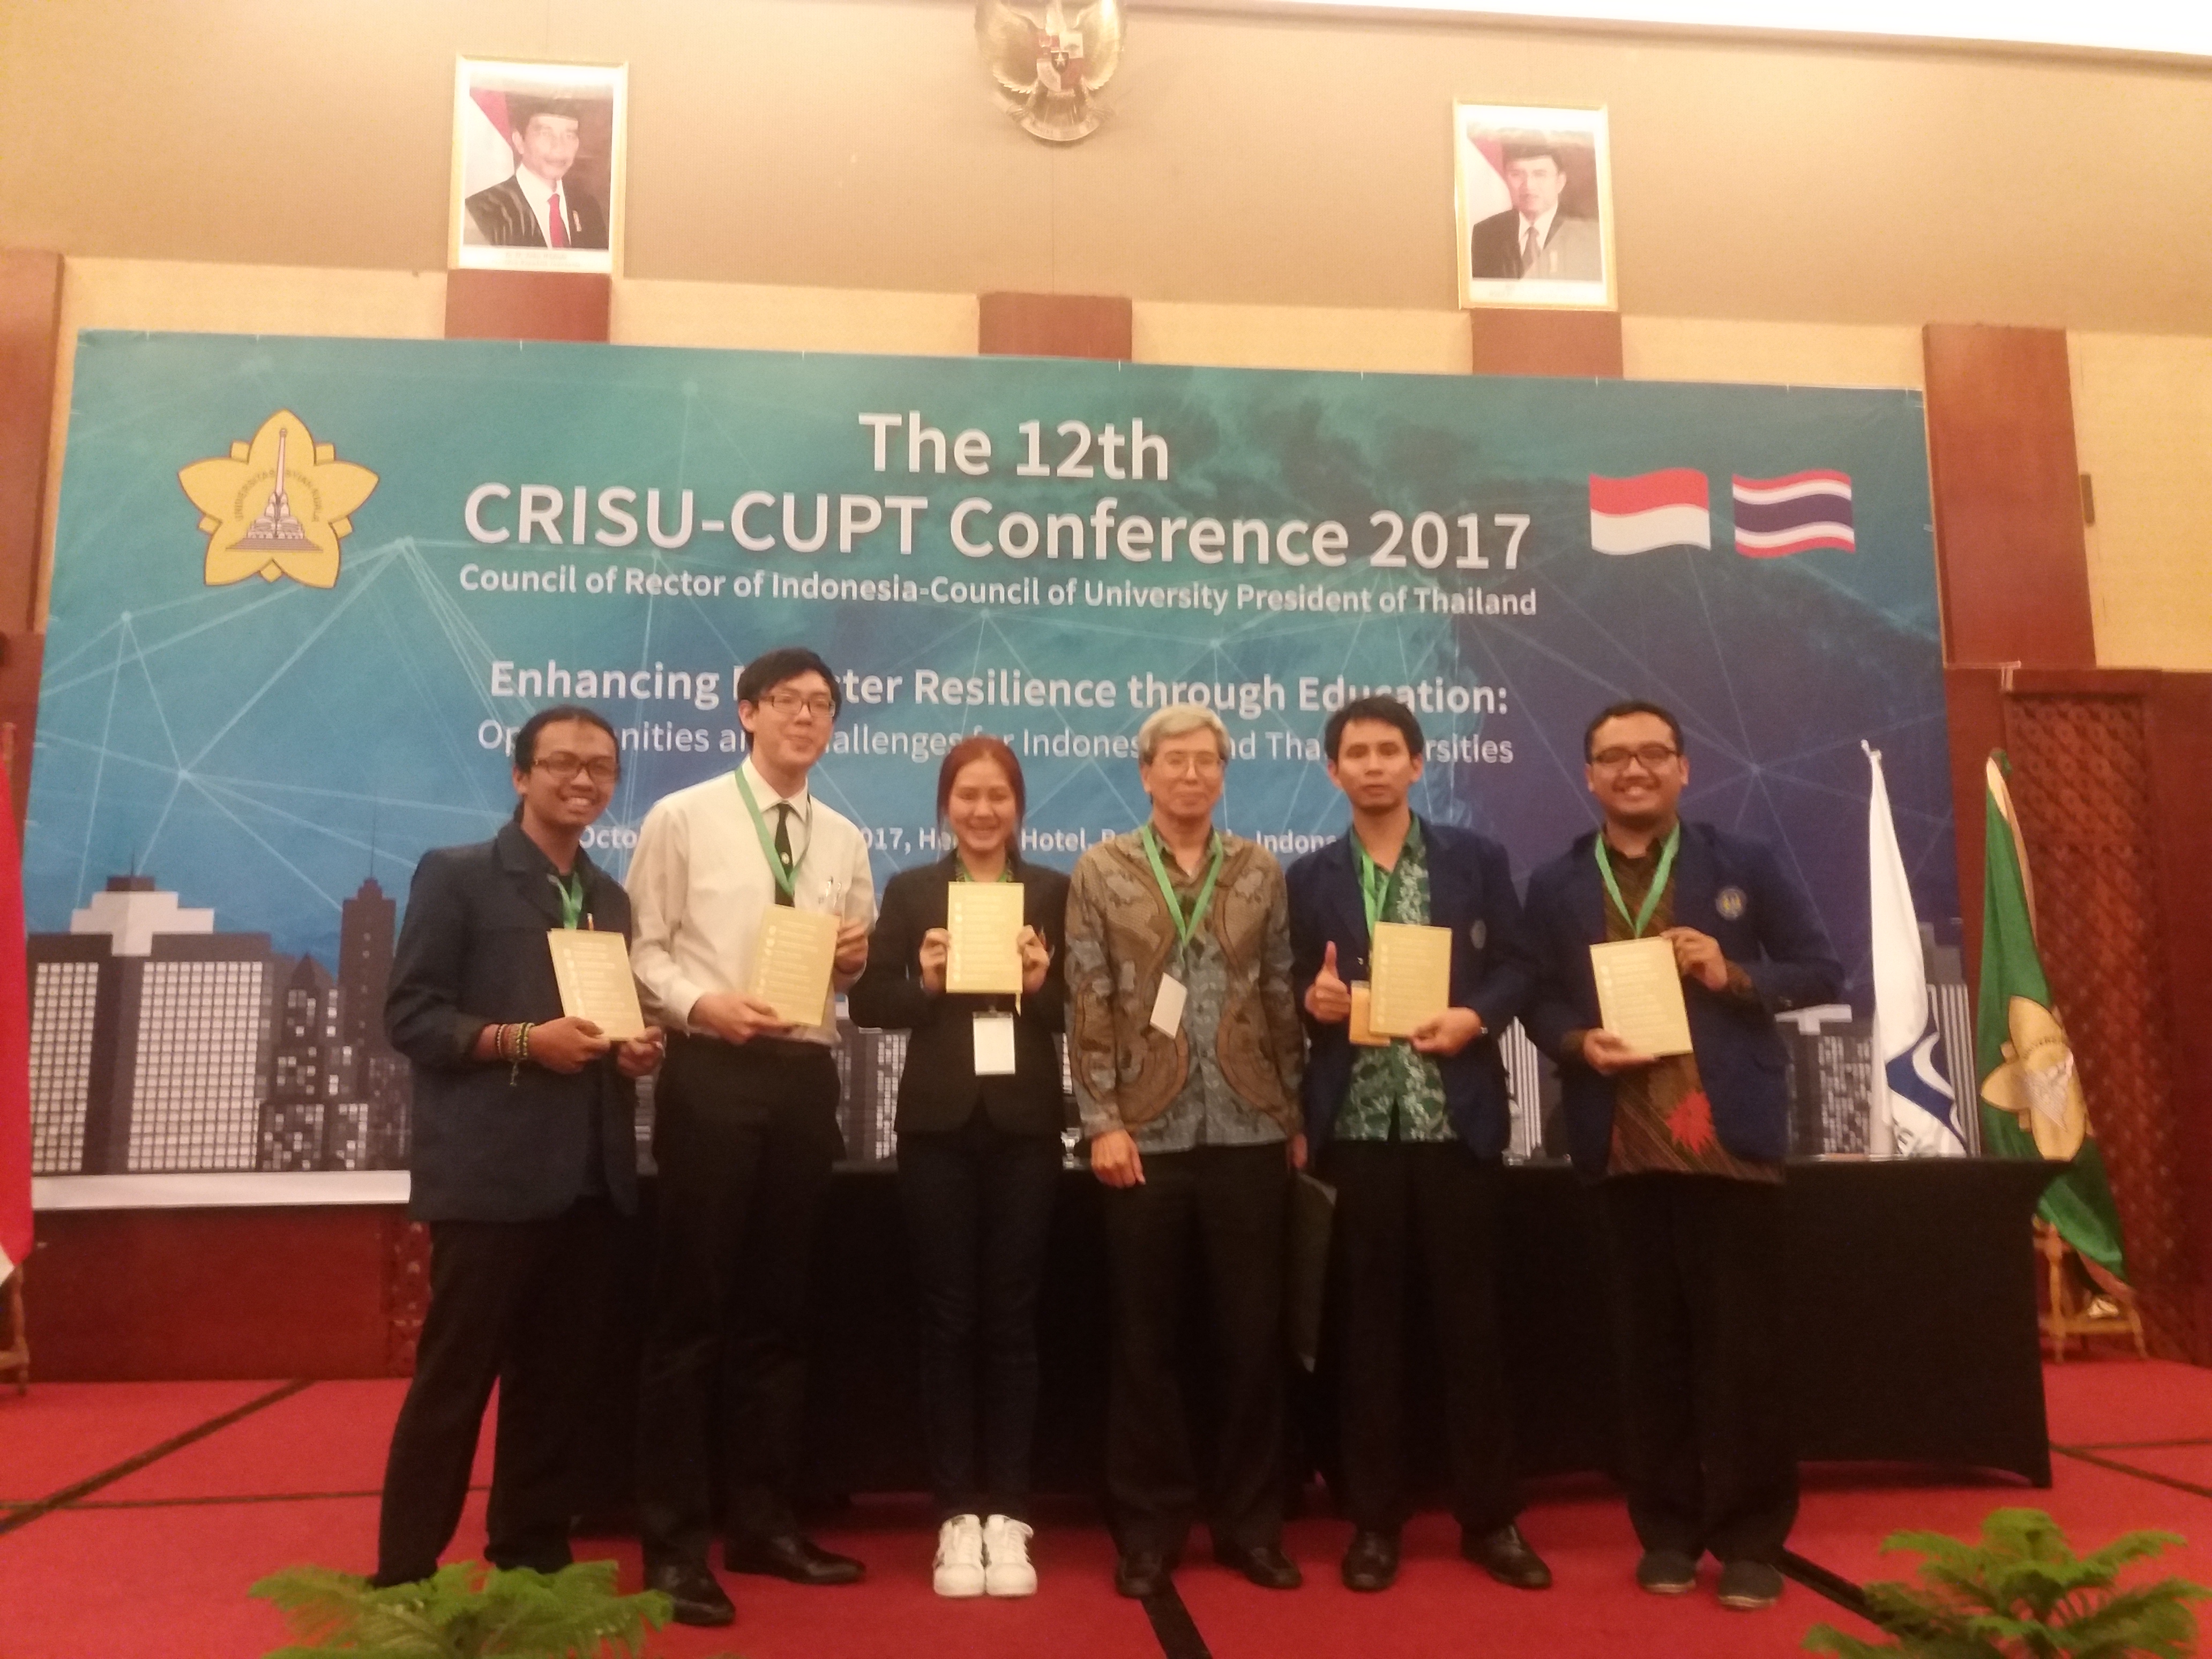 Foto 12th Council of Rector of Indonesian State University-Council of University President of Thailand  (CRISU-CUPT)